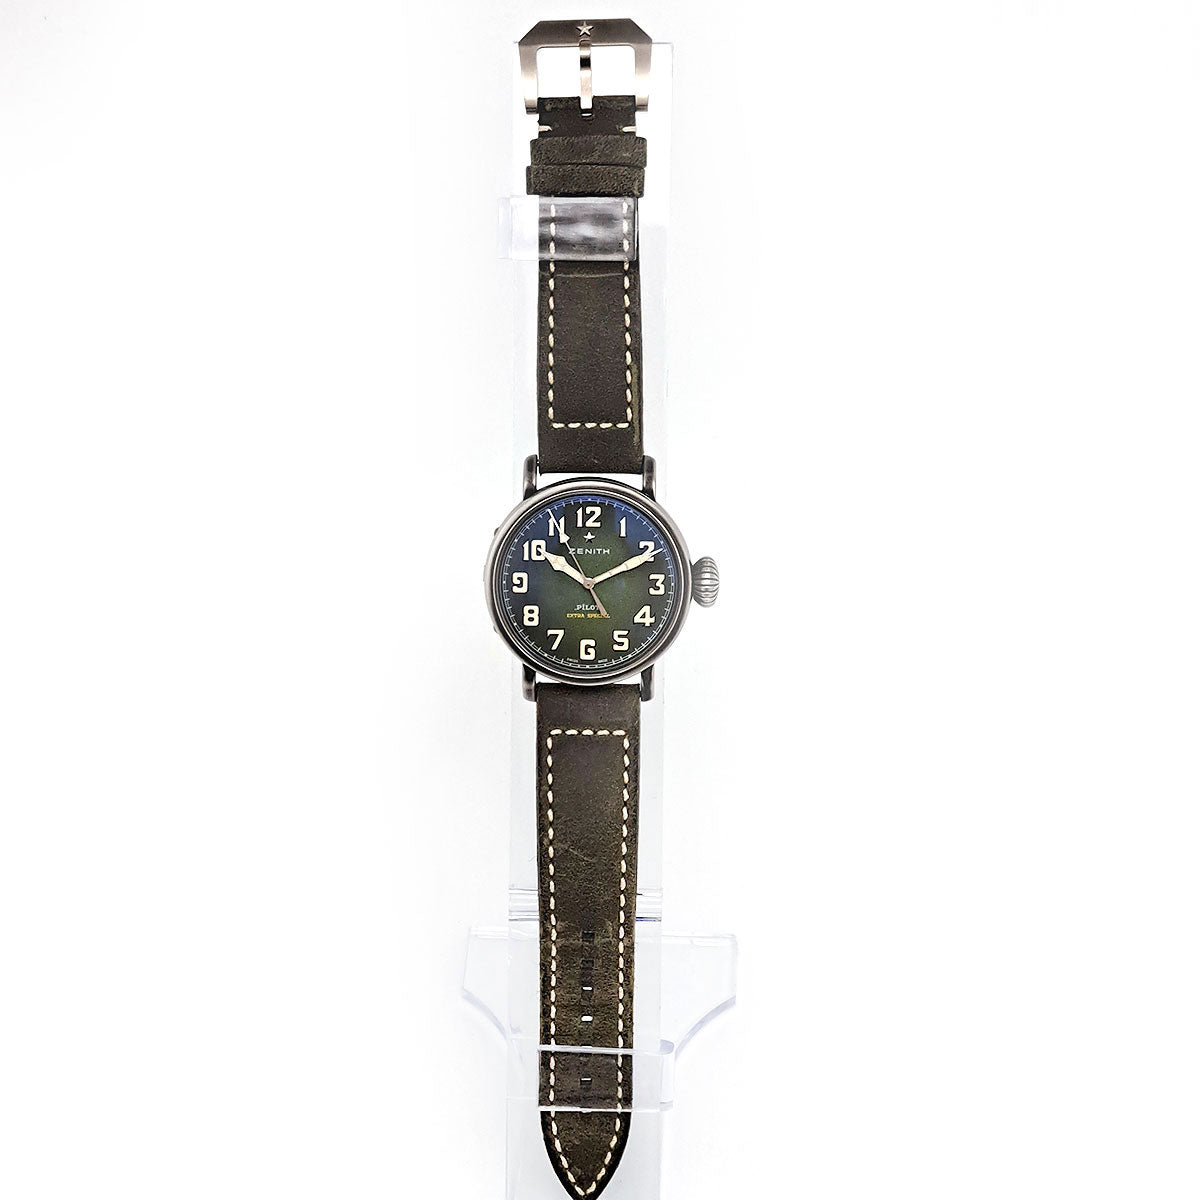 ZENITH Pilot Type 20 Extra Special 11.1943.679 Automatic Stainless Steel Men’s Pre-owned Watch 11.1943.679